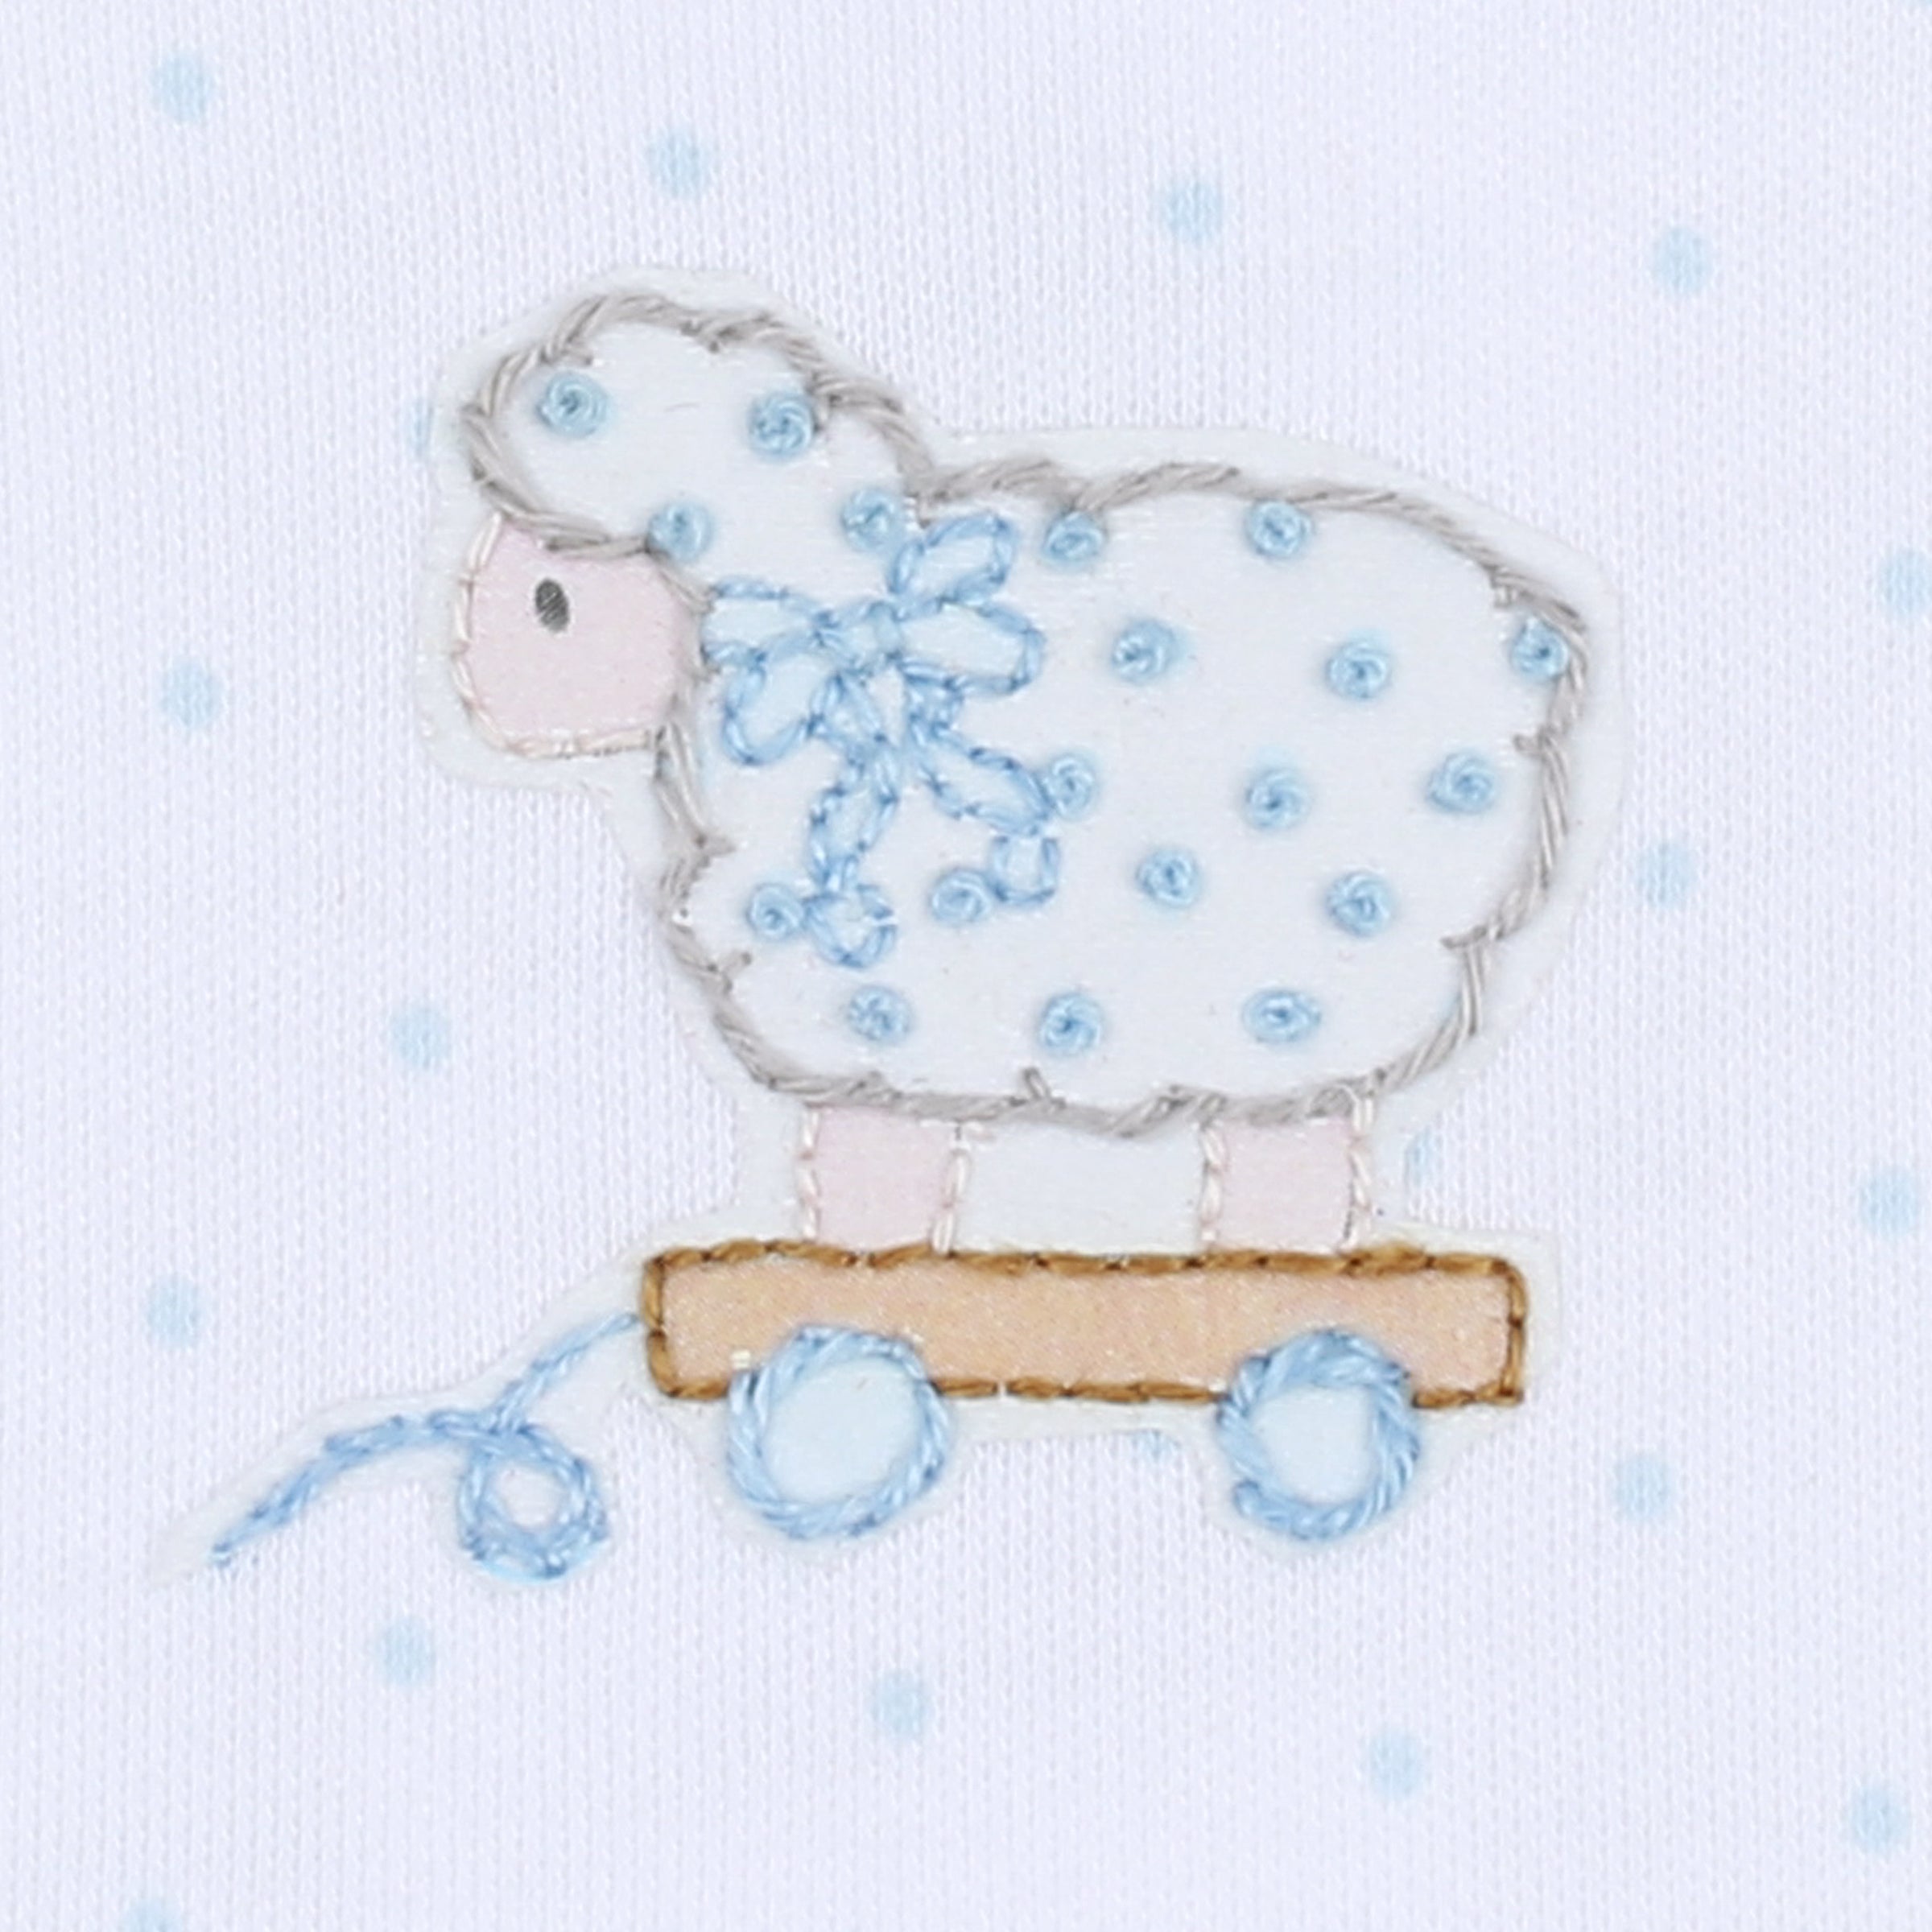 Darling Lambs Embroidered Footie - Blue